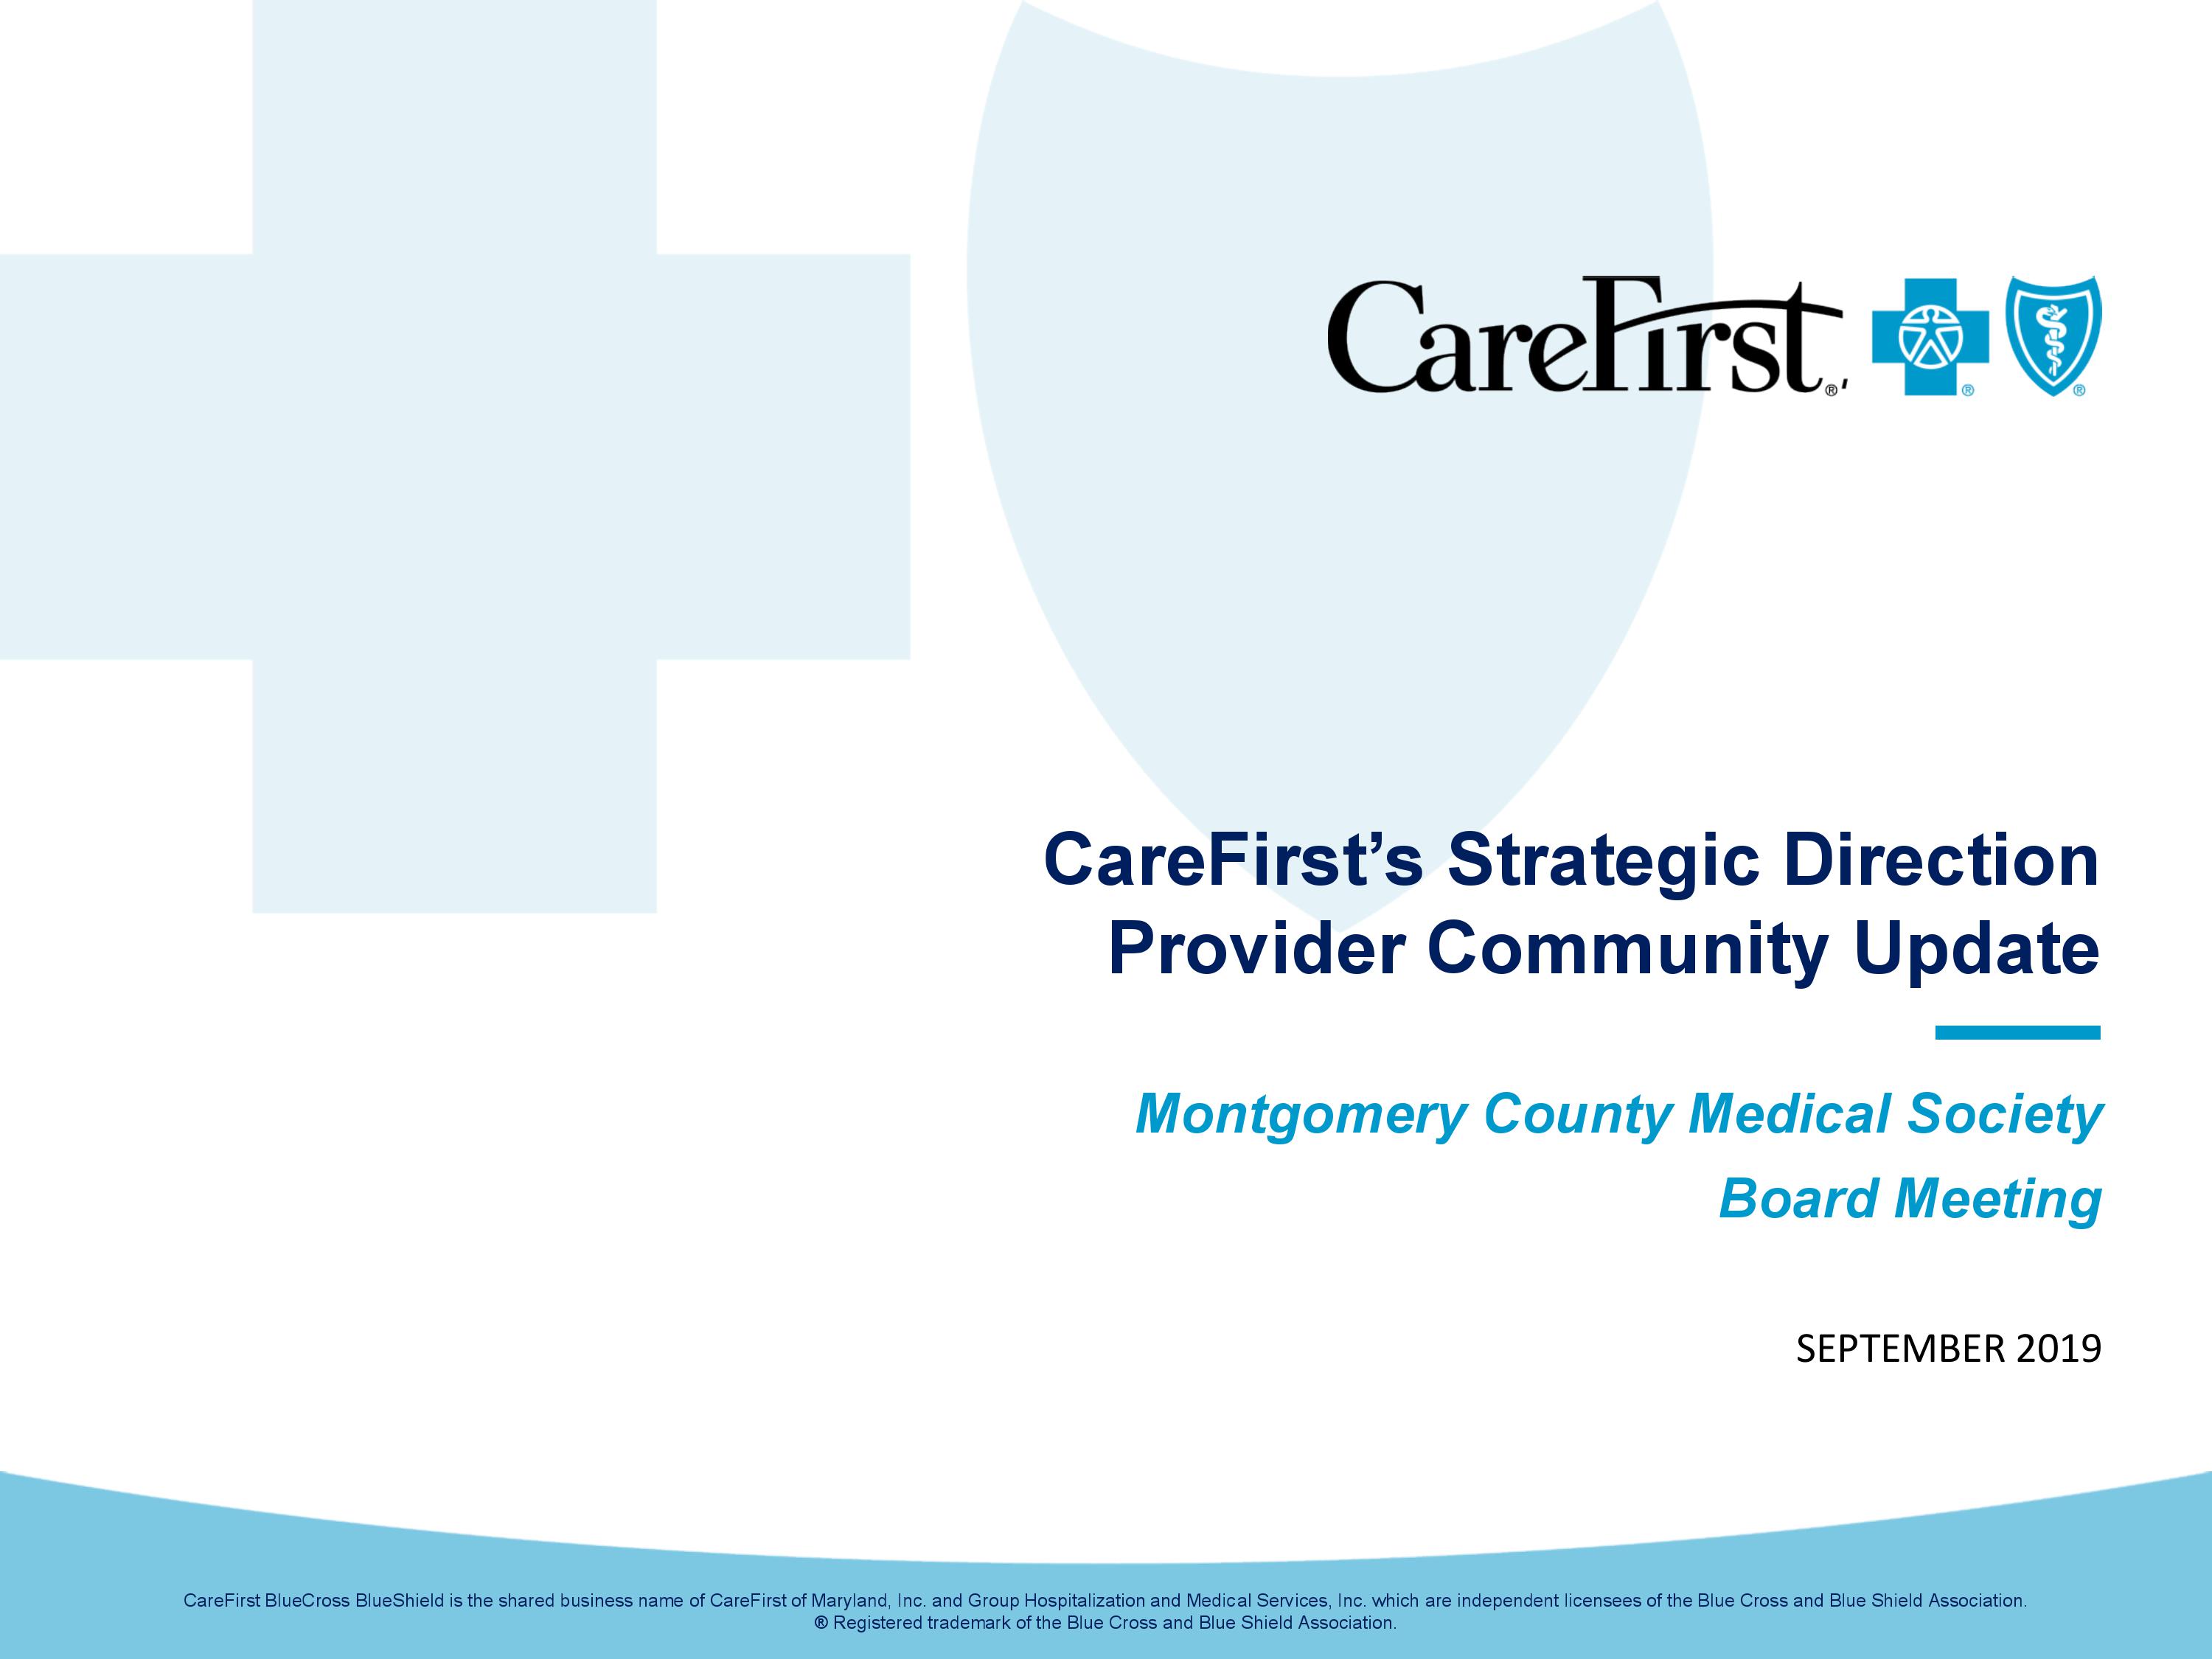 does carefirst require a 3 month waiting period